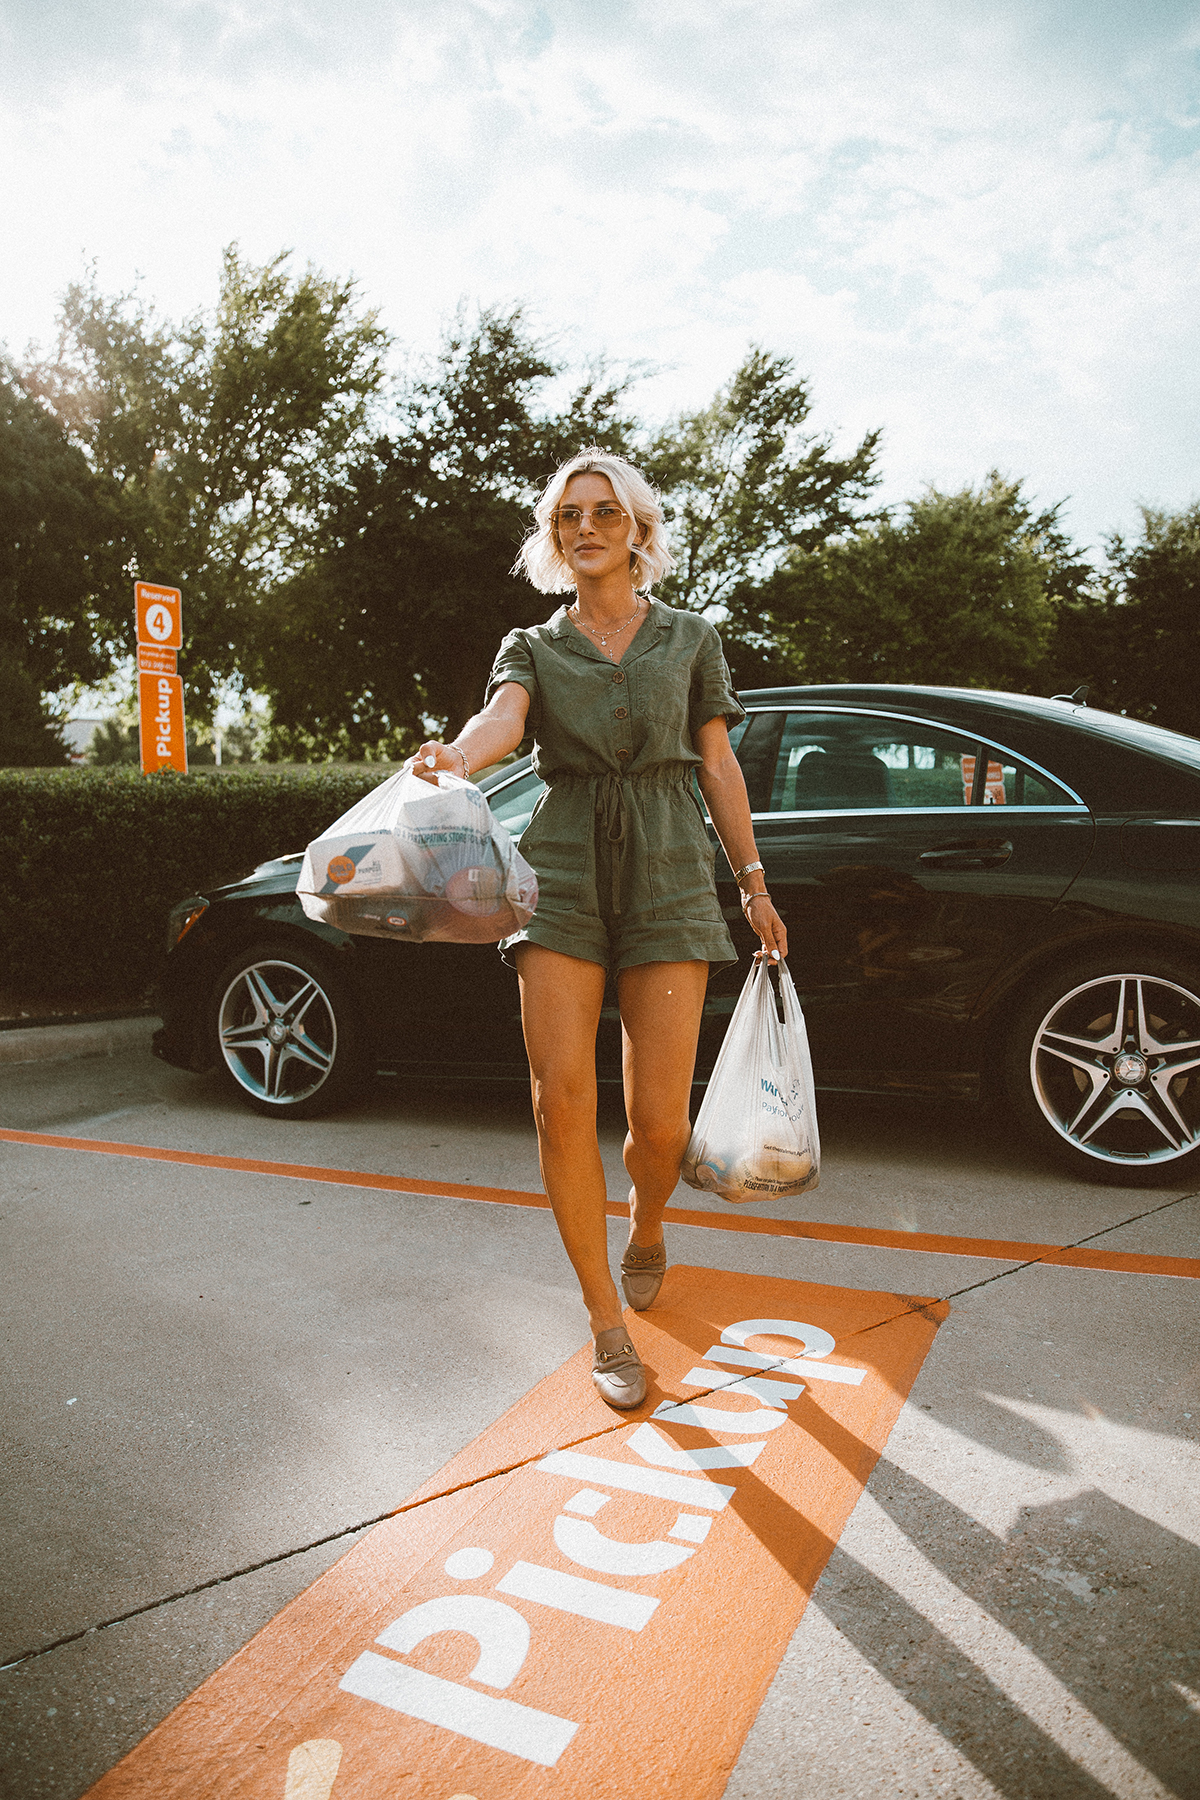 Dallas blogger So Sage sharing her review on the Walmart Grocery Pickup service